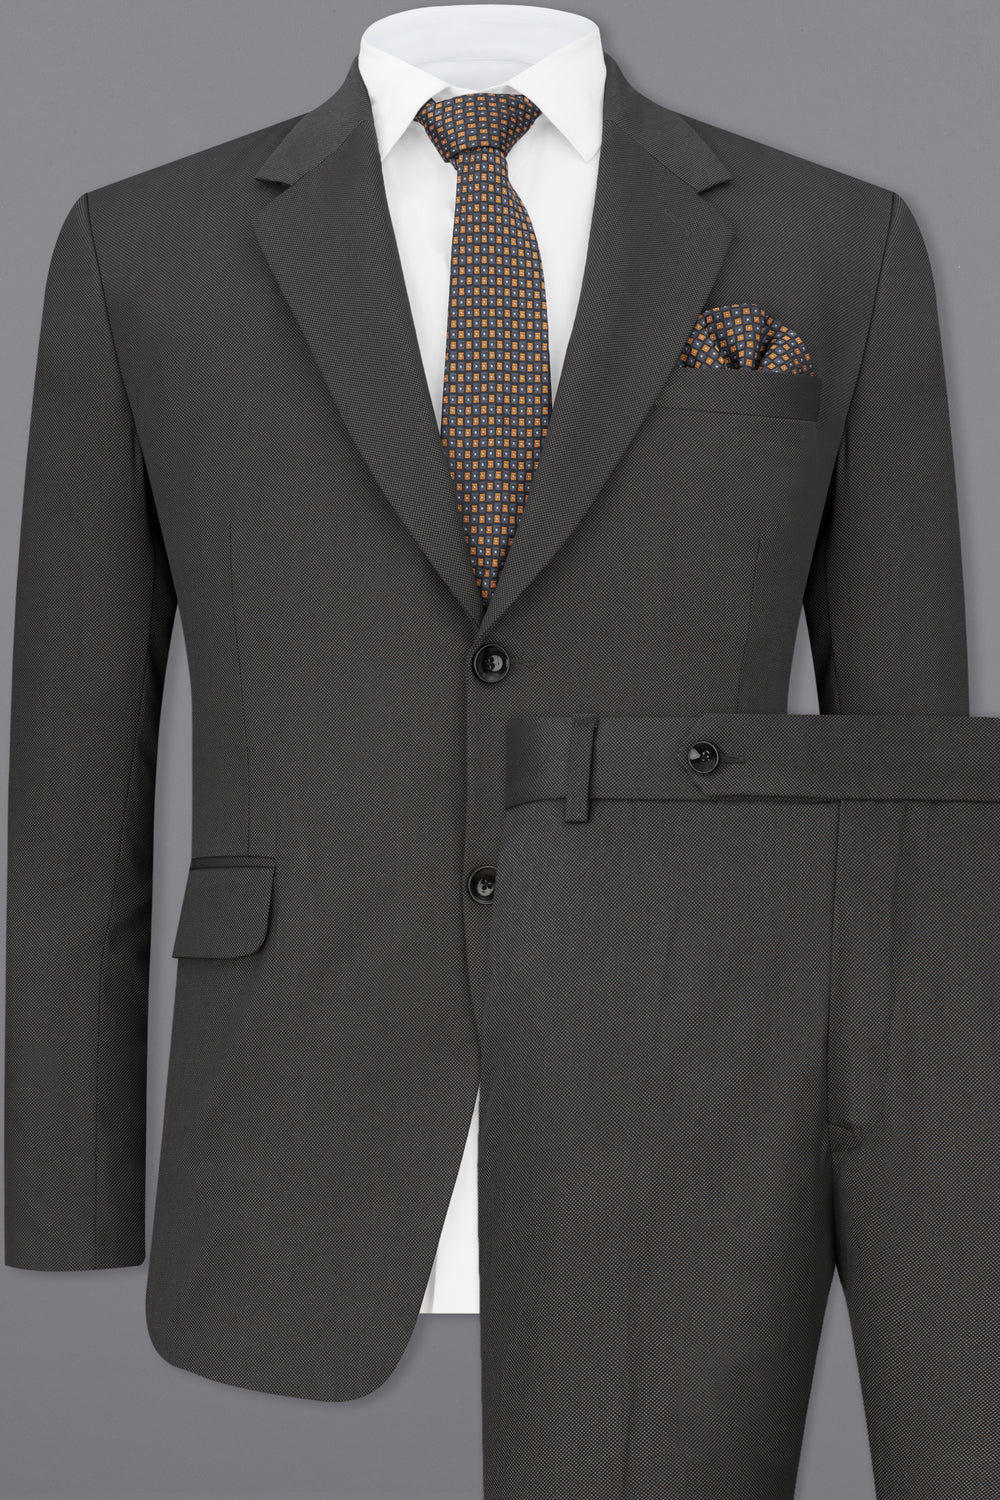 11 Grey Suit Combinations To Look Decent in Every Occasions